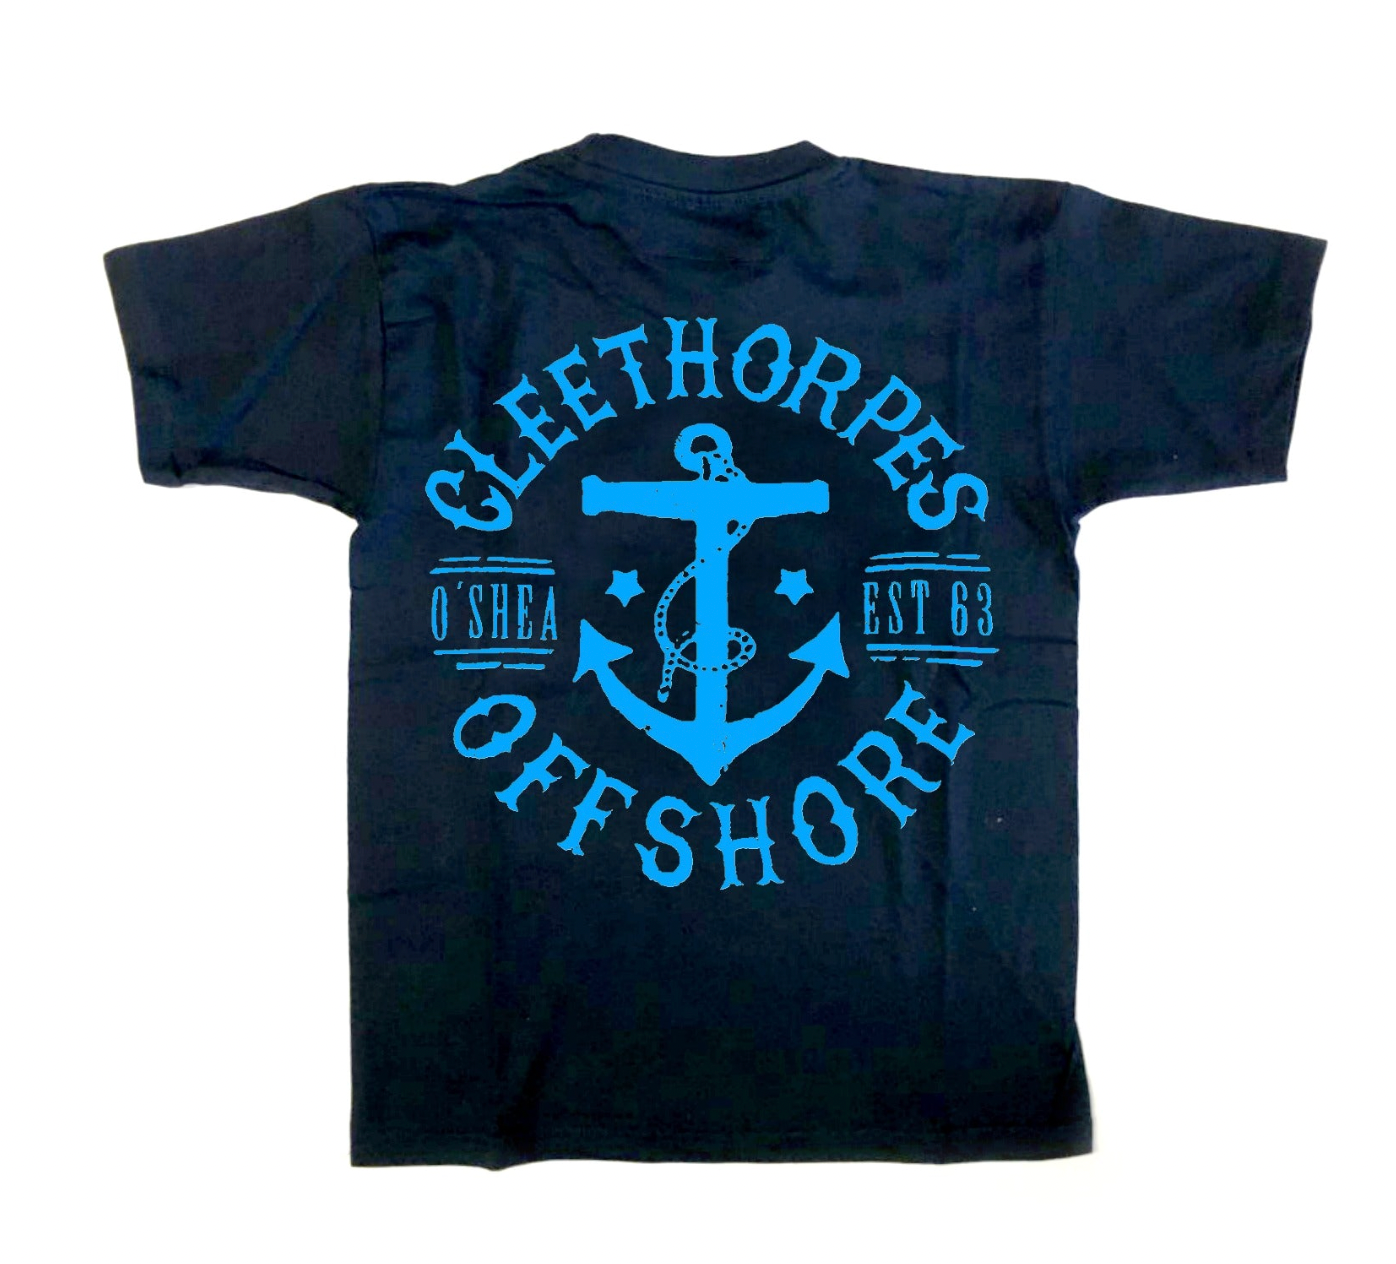 CLEETHORPES NAVY OFFSHORE T-SHIRT